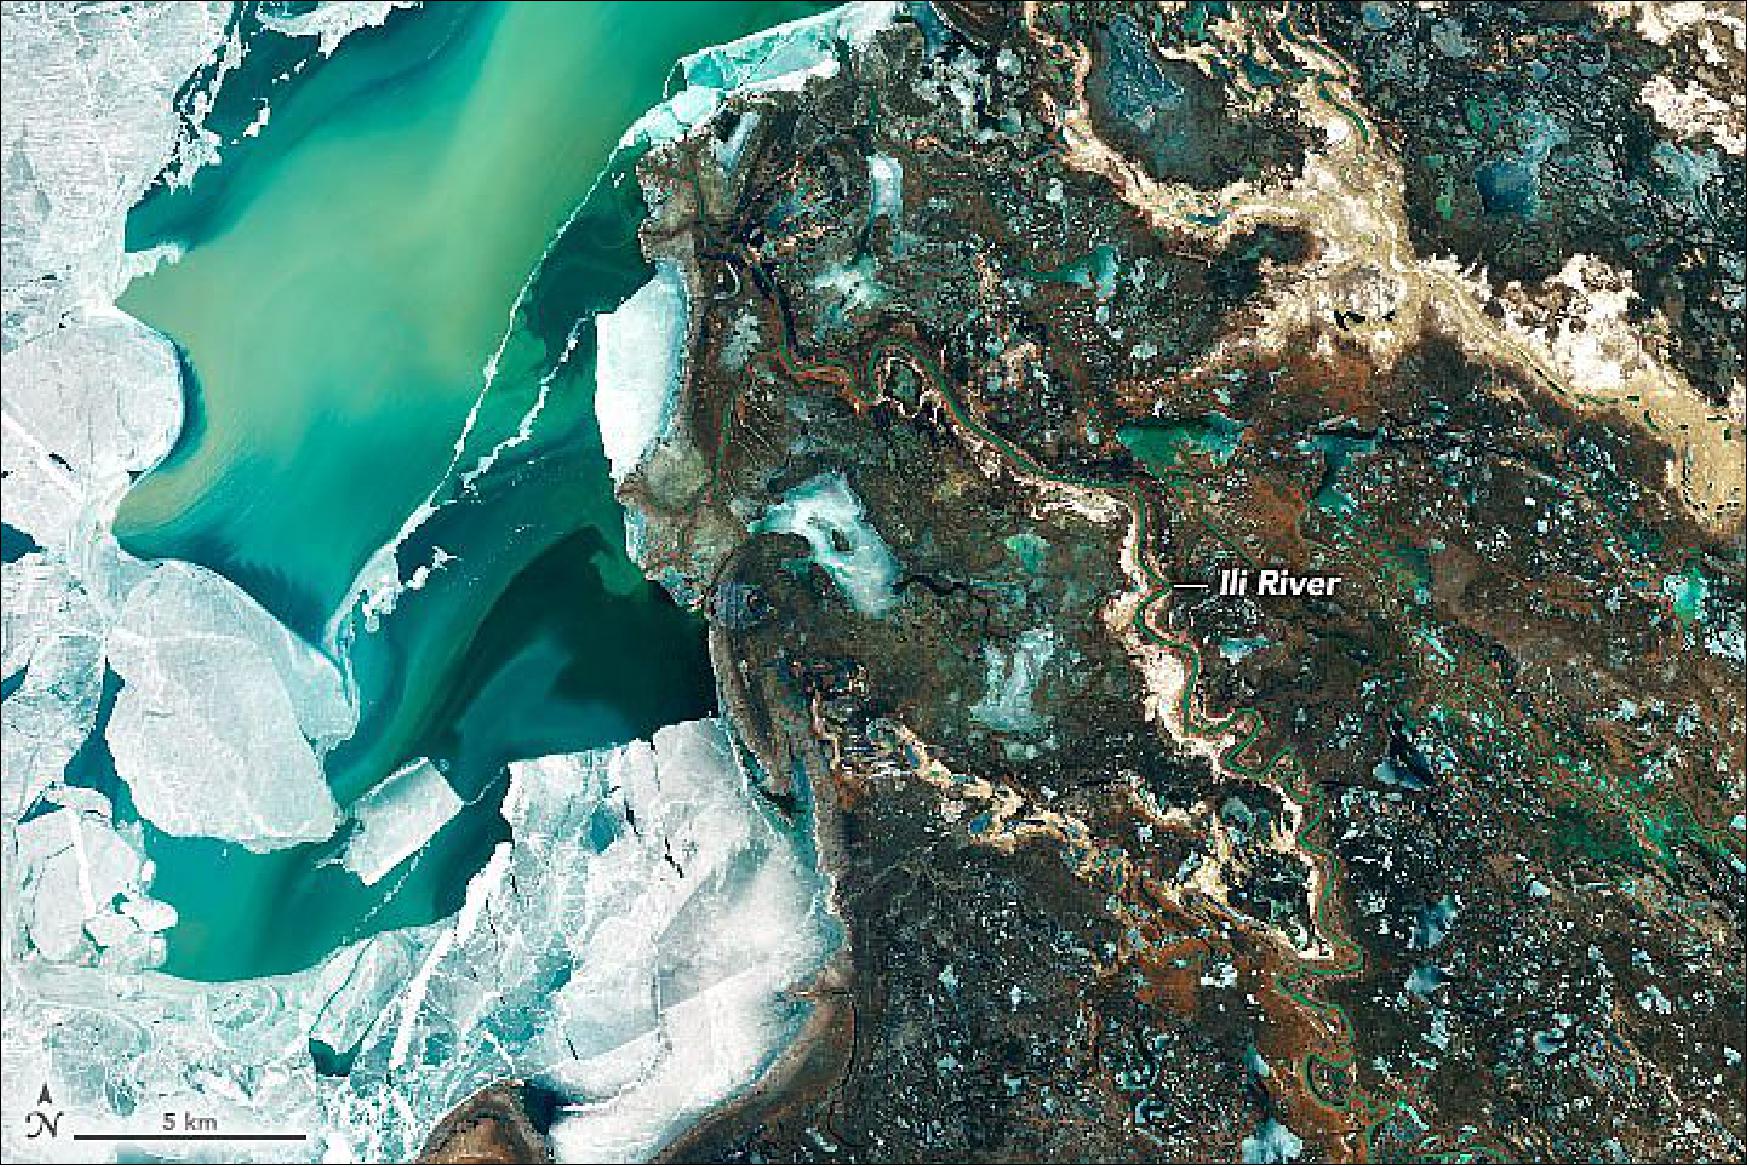 Figure 103: When OLI on Landsat-8 acquired this natural-color image on March 7, 2020, the delta was just starting to shake off the chill of winter. While many of the delta’s lakes and ponds were still frozen, the ice on Lake Balkhash was breaking up, revealing swirls of sediment and the shallow, sandy bed of the western part of the lake. Over the deeper eastern part of the lake, ice persisted until the last week of March (image credit: NASA Earth Observatory, images by Joshua Stevens, using Landsat data from the U.S. Geological Survey. Story by Adam Voiland)